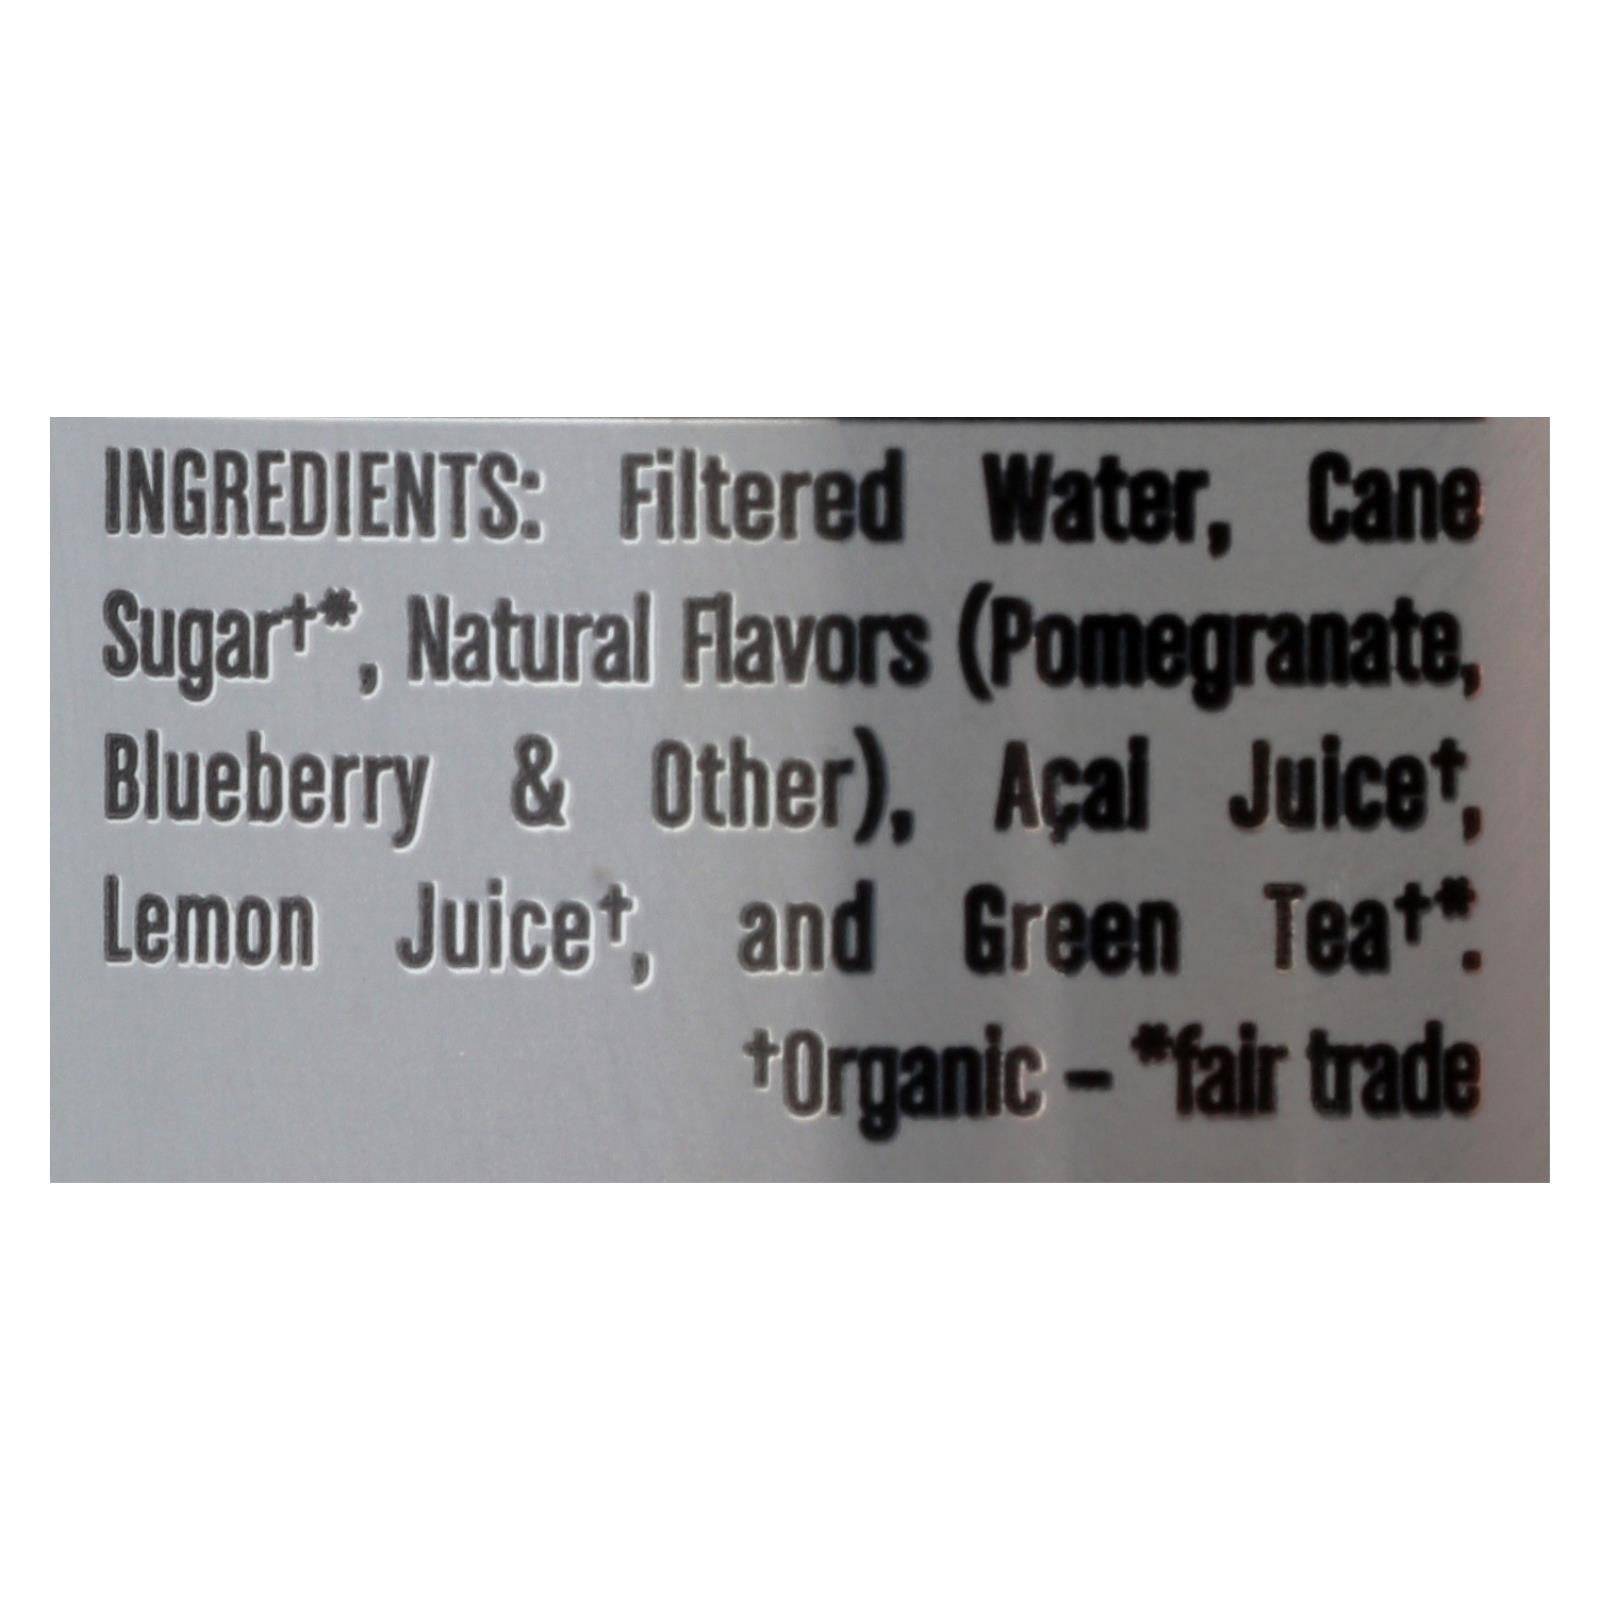 Buy Steaz Lightly Sweetened Green Tea - Blueberry Pomegranate - Case Of 12 - 16 Fl Oz.  at OnlyNaturals.us